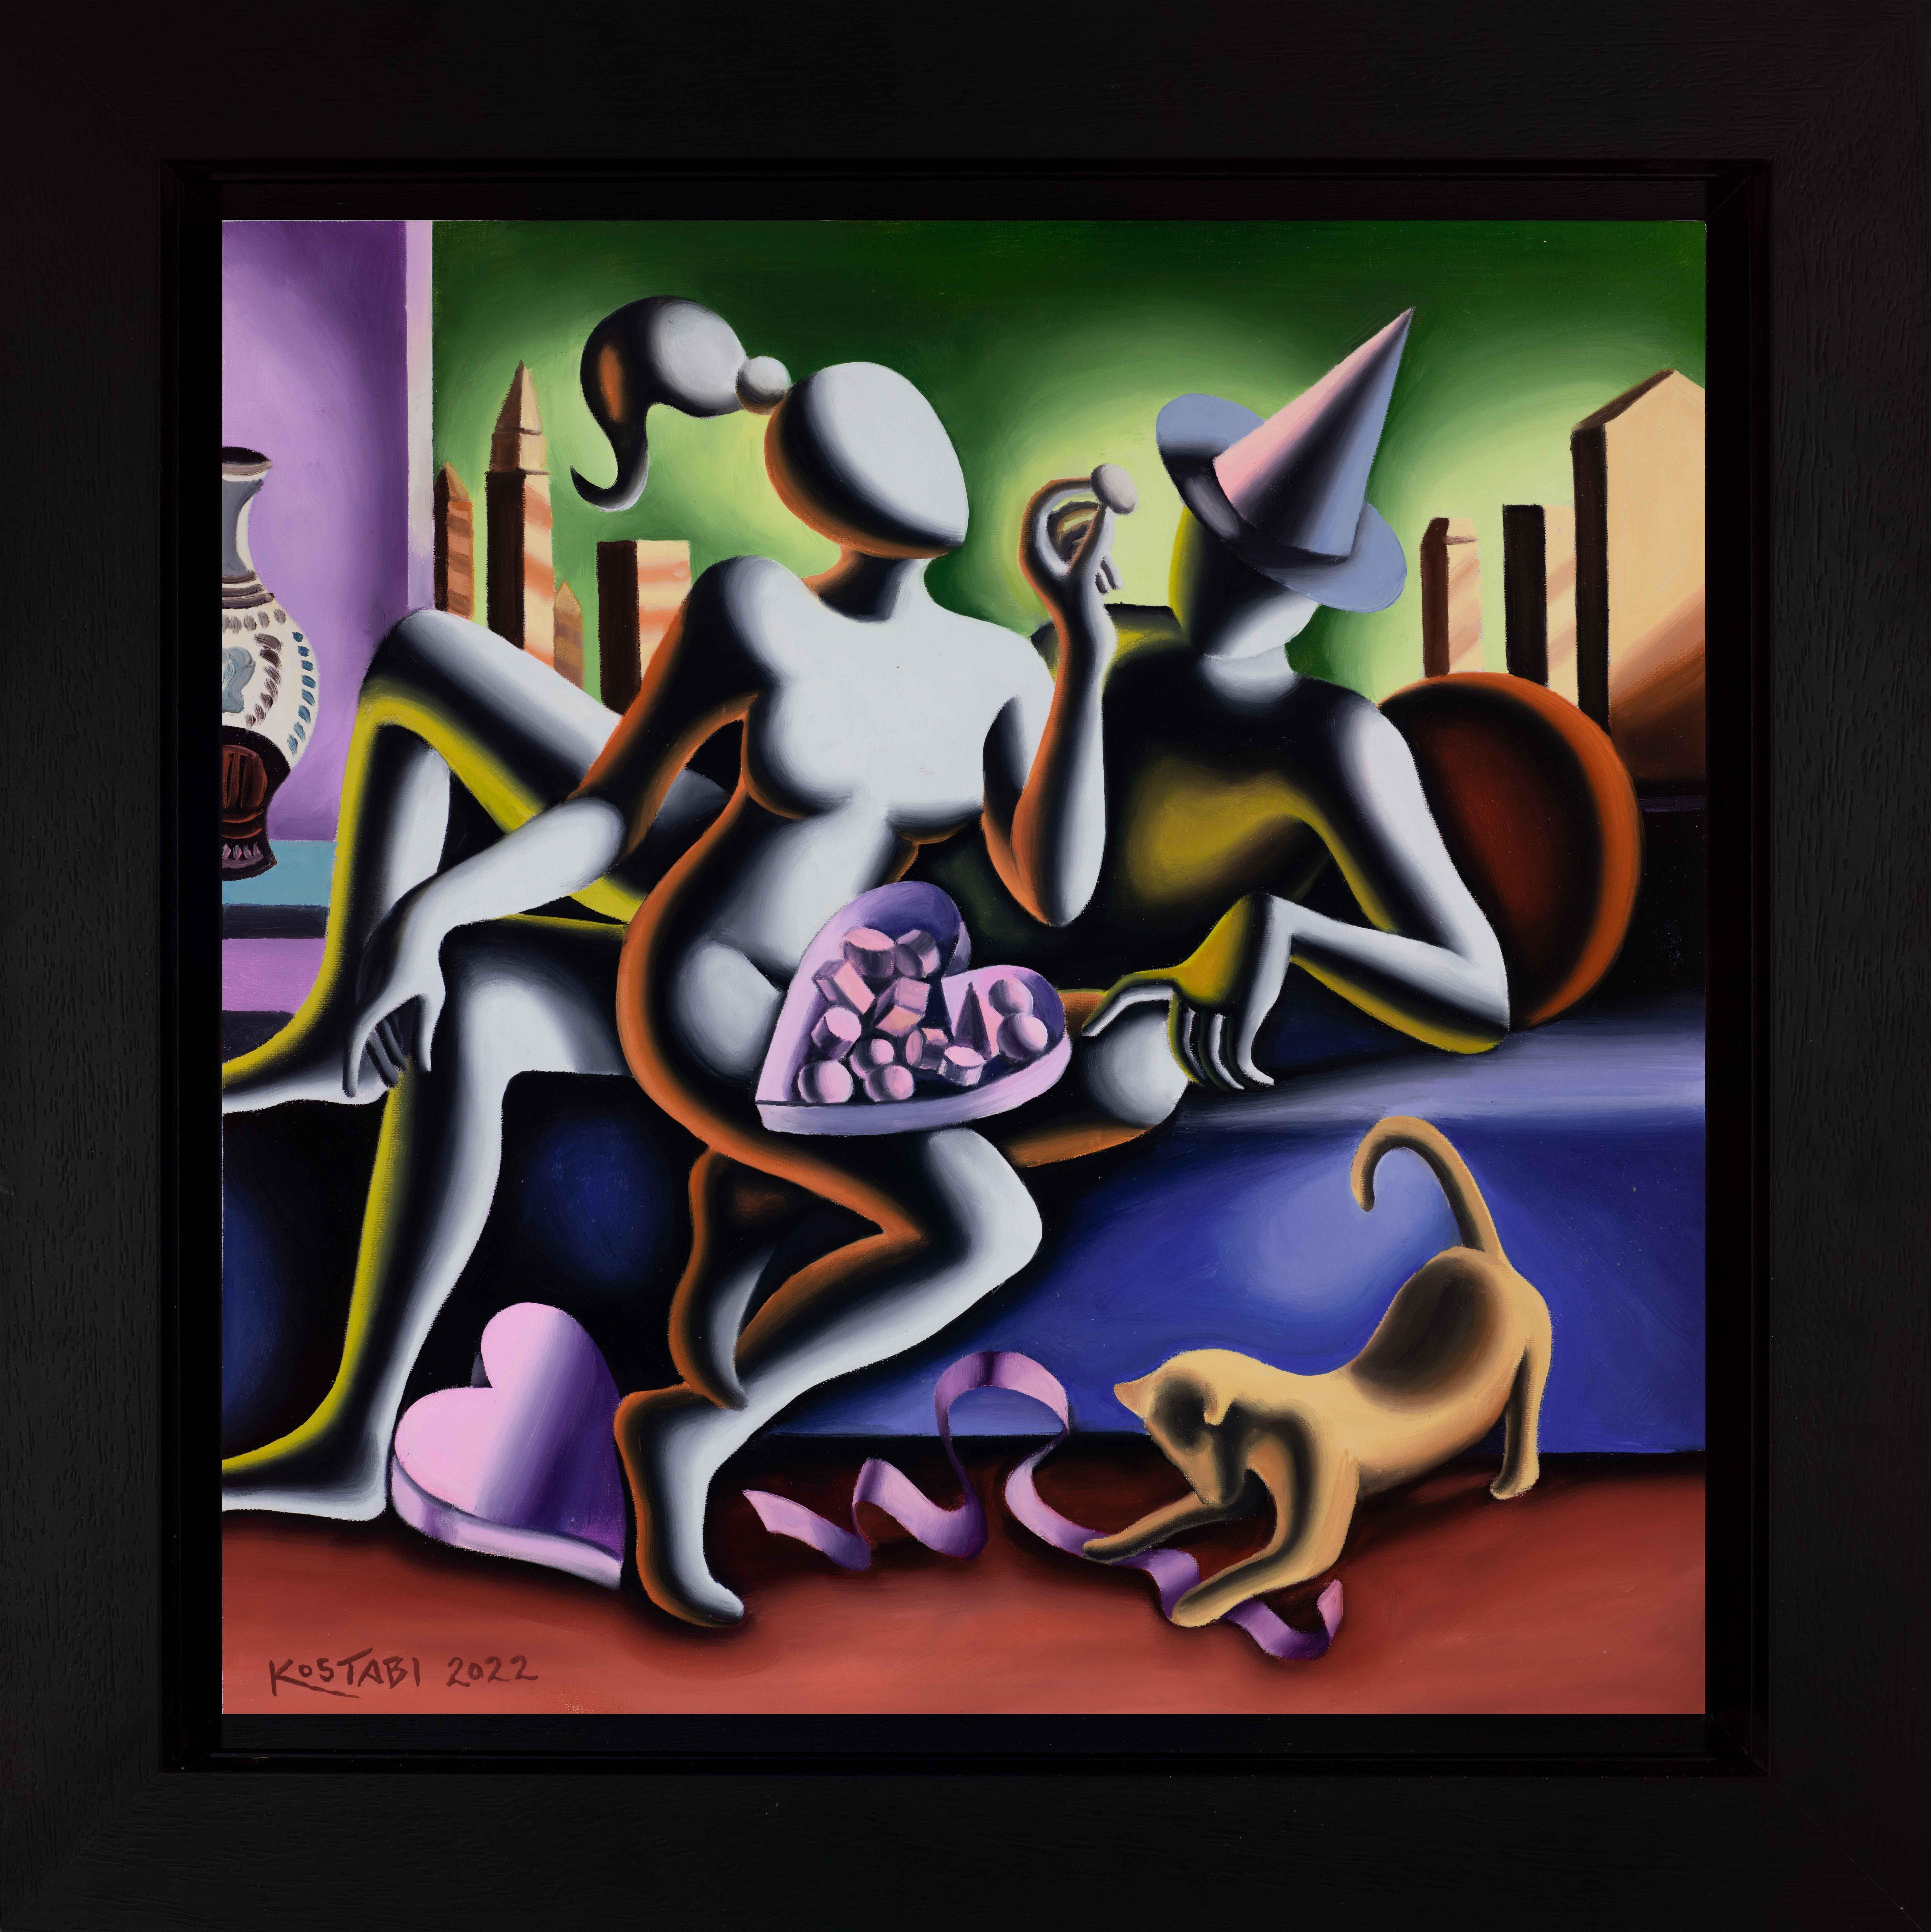 Domestic Bliss, 2022 - Painting by Mark Kostabi